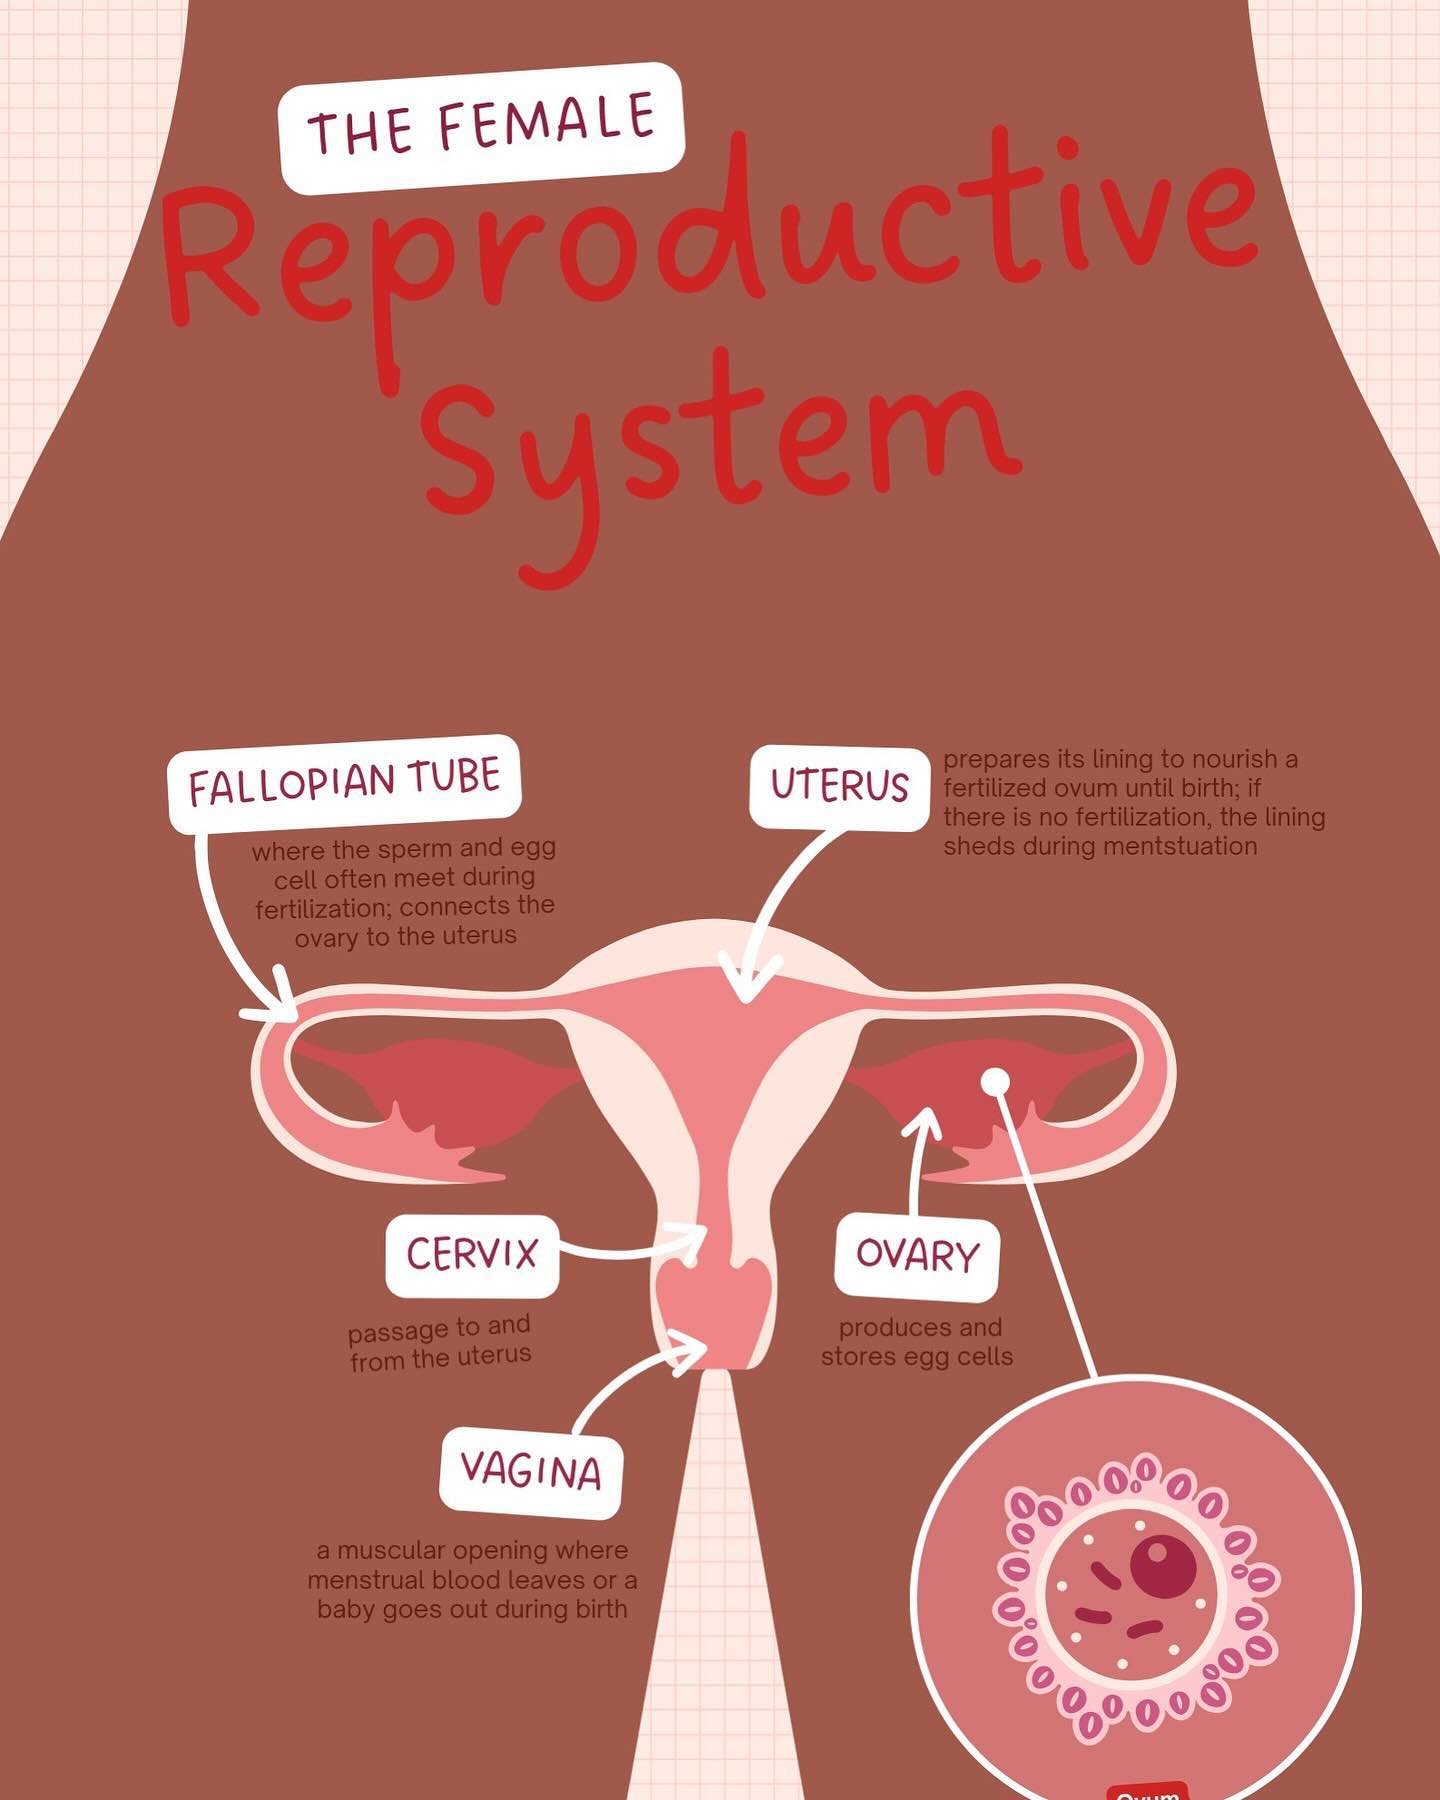 Empowerment starts from within. Understanding the incredible complexity and beauty of the female reproductive system. 🌸✨When&rsquo;s the last time you got screened for fibroids? #KnowYourBody #FemaleHealth